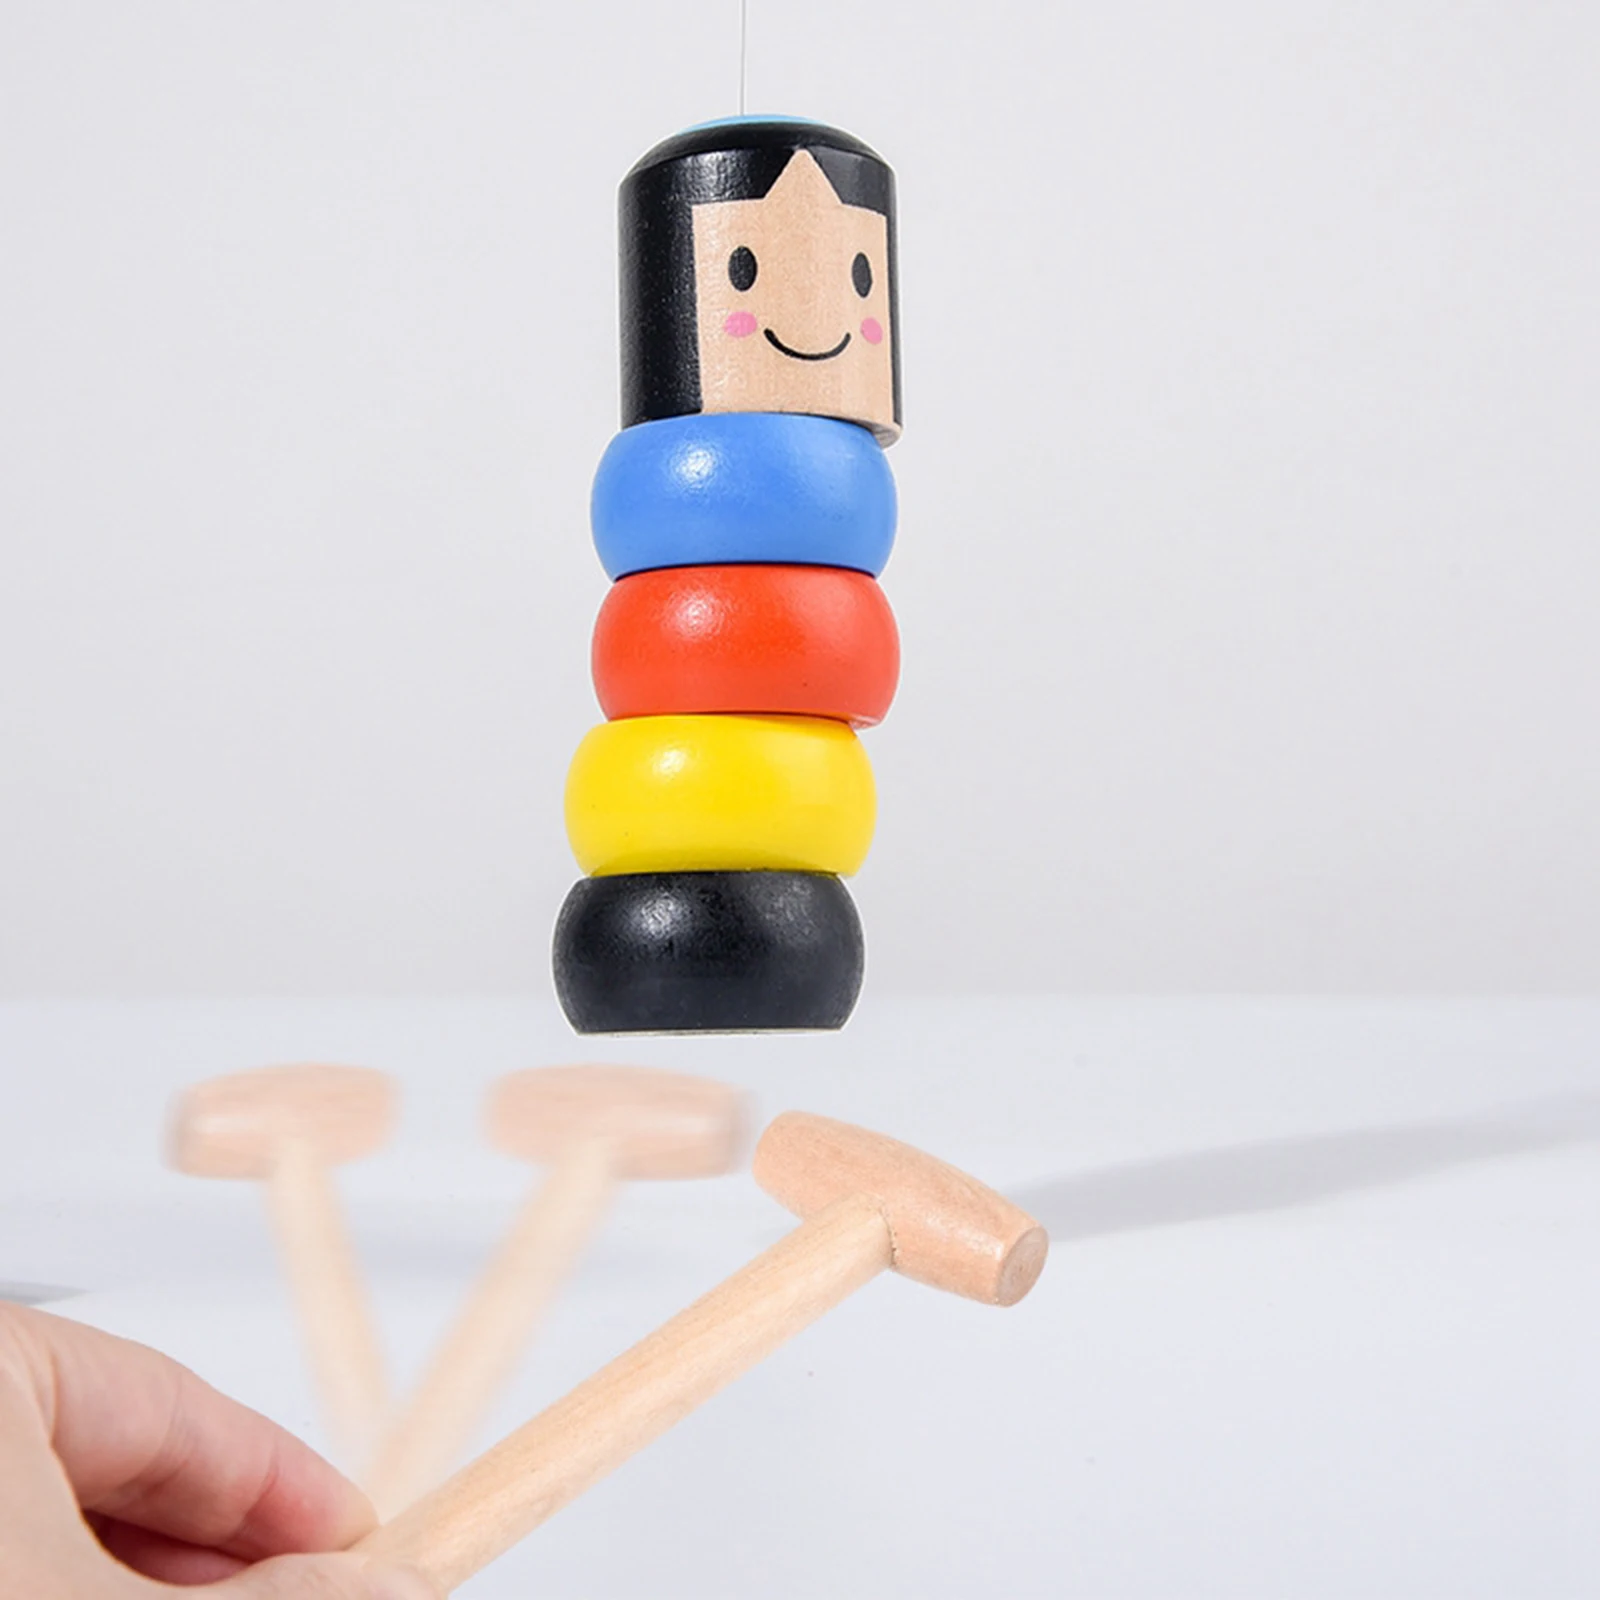 Stubborn Wood Man Toy Funny Unbreakable Magic Tricks Toys for Kids